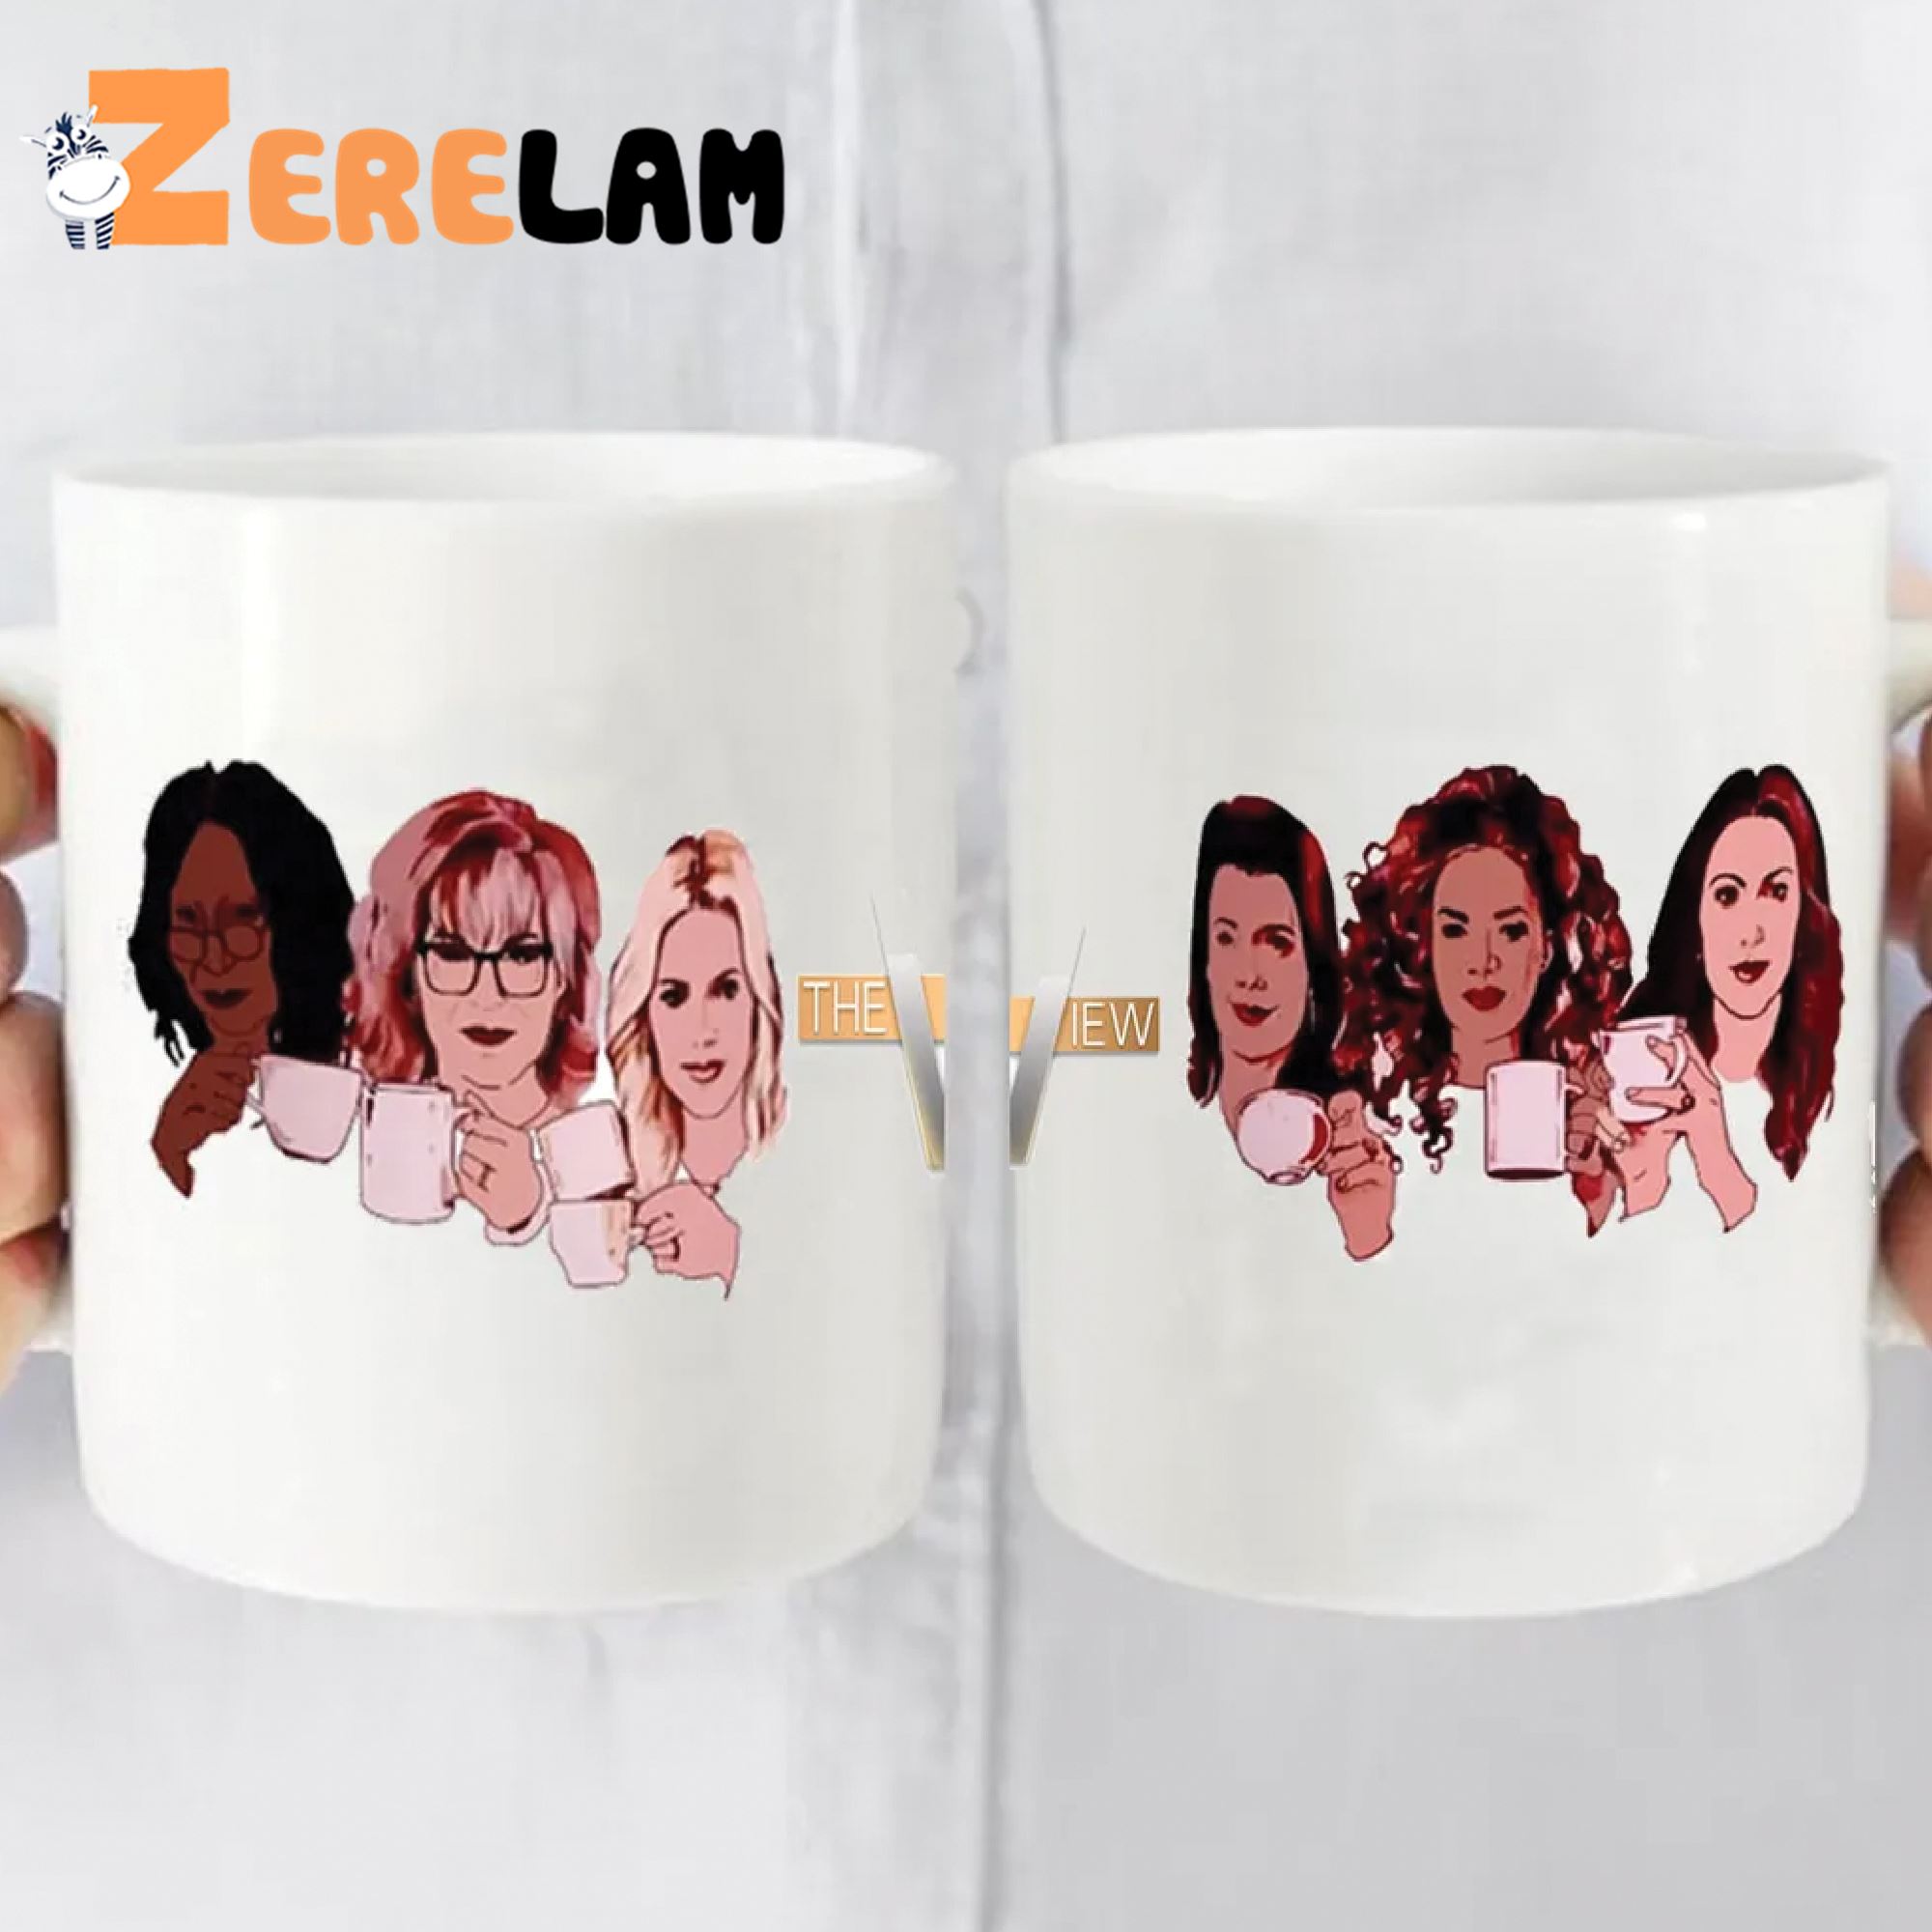 styling chamberlain coffee mugs by @venusmamiii, mug, styling chamberlain  coffee mugs by @venusmamiii today + tomorrow get a free mug in all orders  over $30. US only, By Chamberlain Coffee